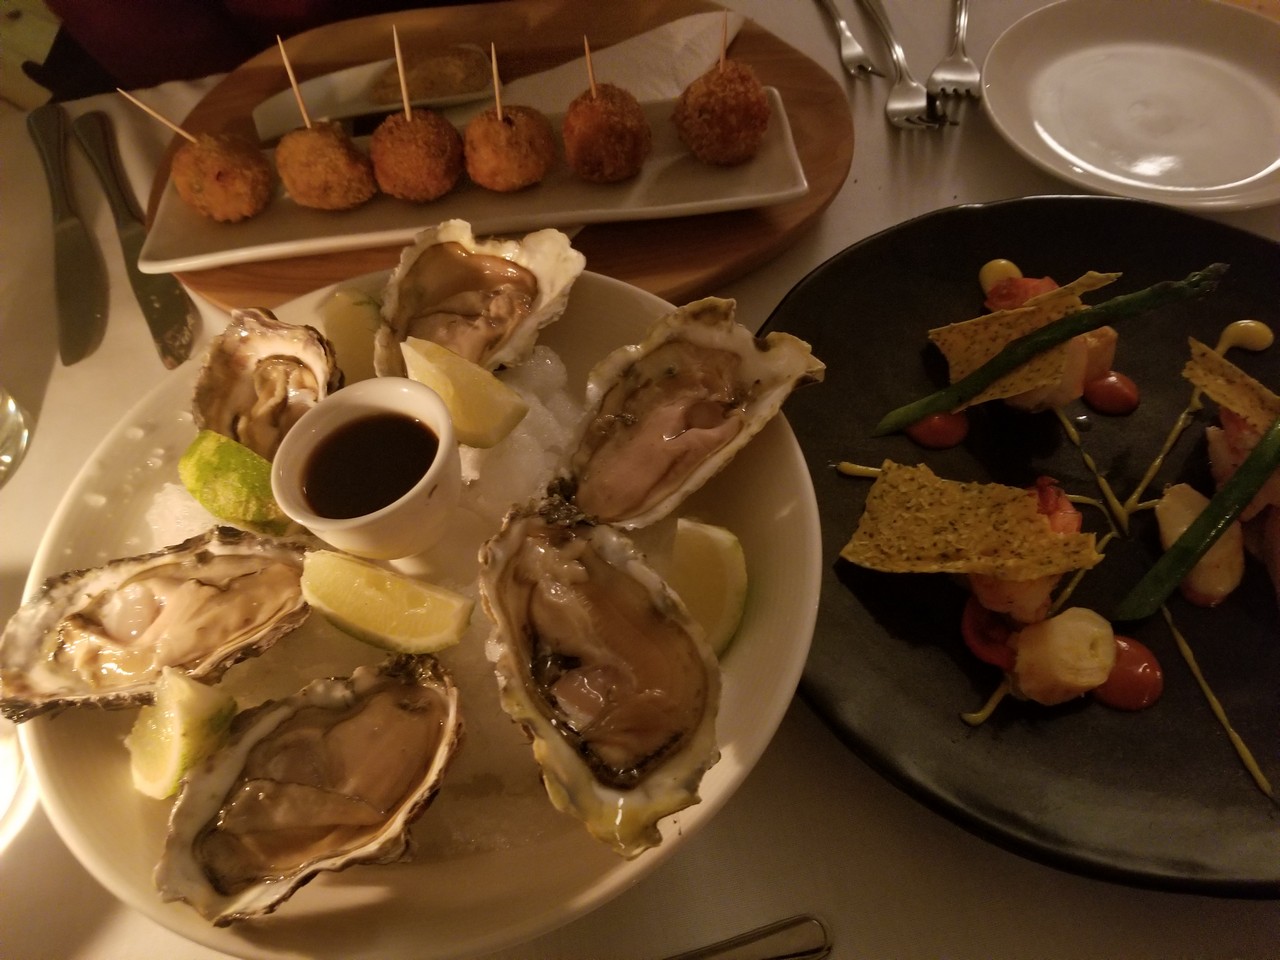 a plate of oysters and a plate of food